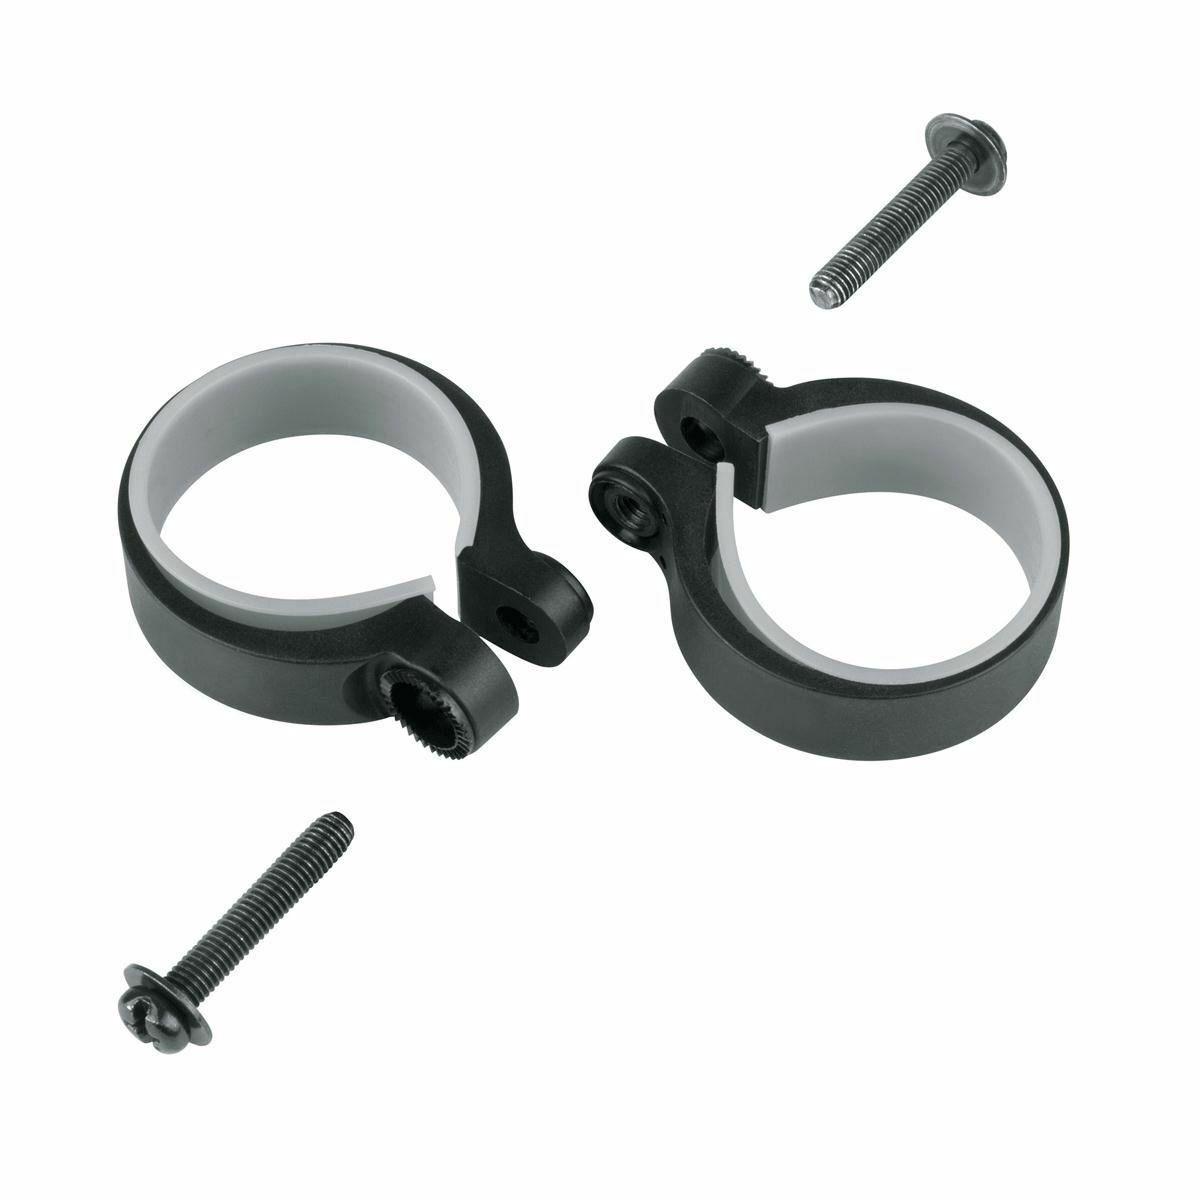 SKS STAY MOUNTING CLAMPS 2 PCS 26,5-30,5